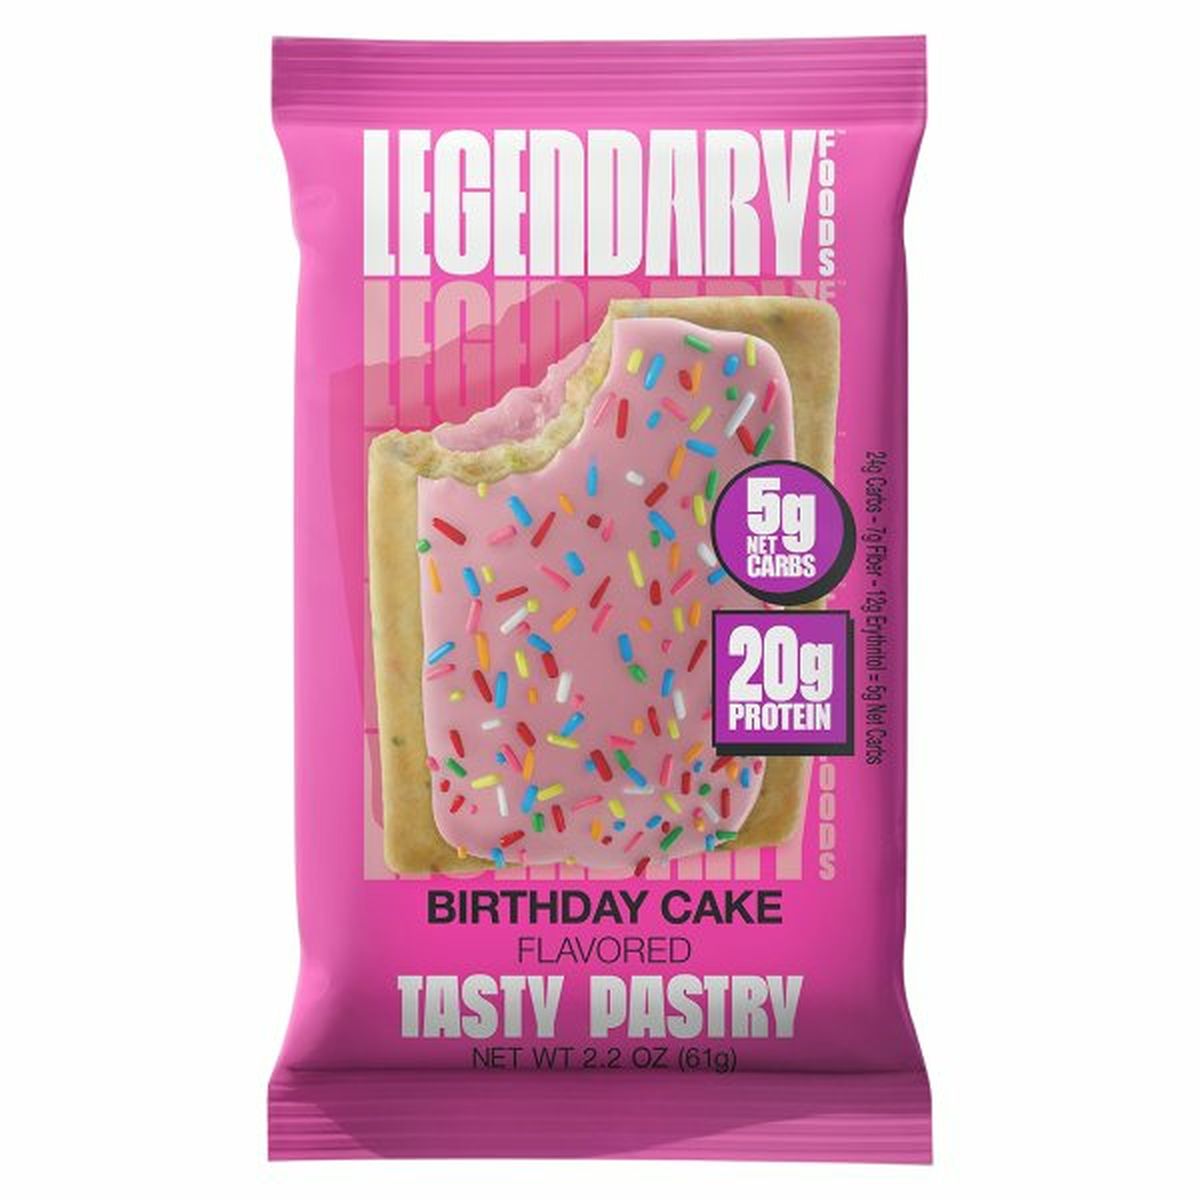 Calories in Legendary Foods Tasty Pastry, Birthday Cake Flavored